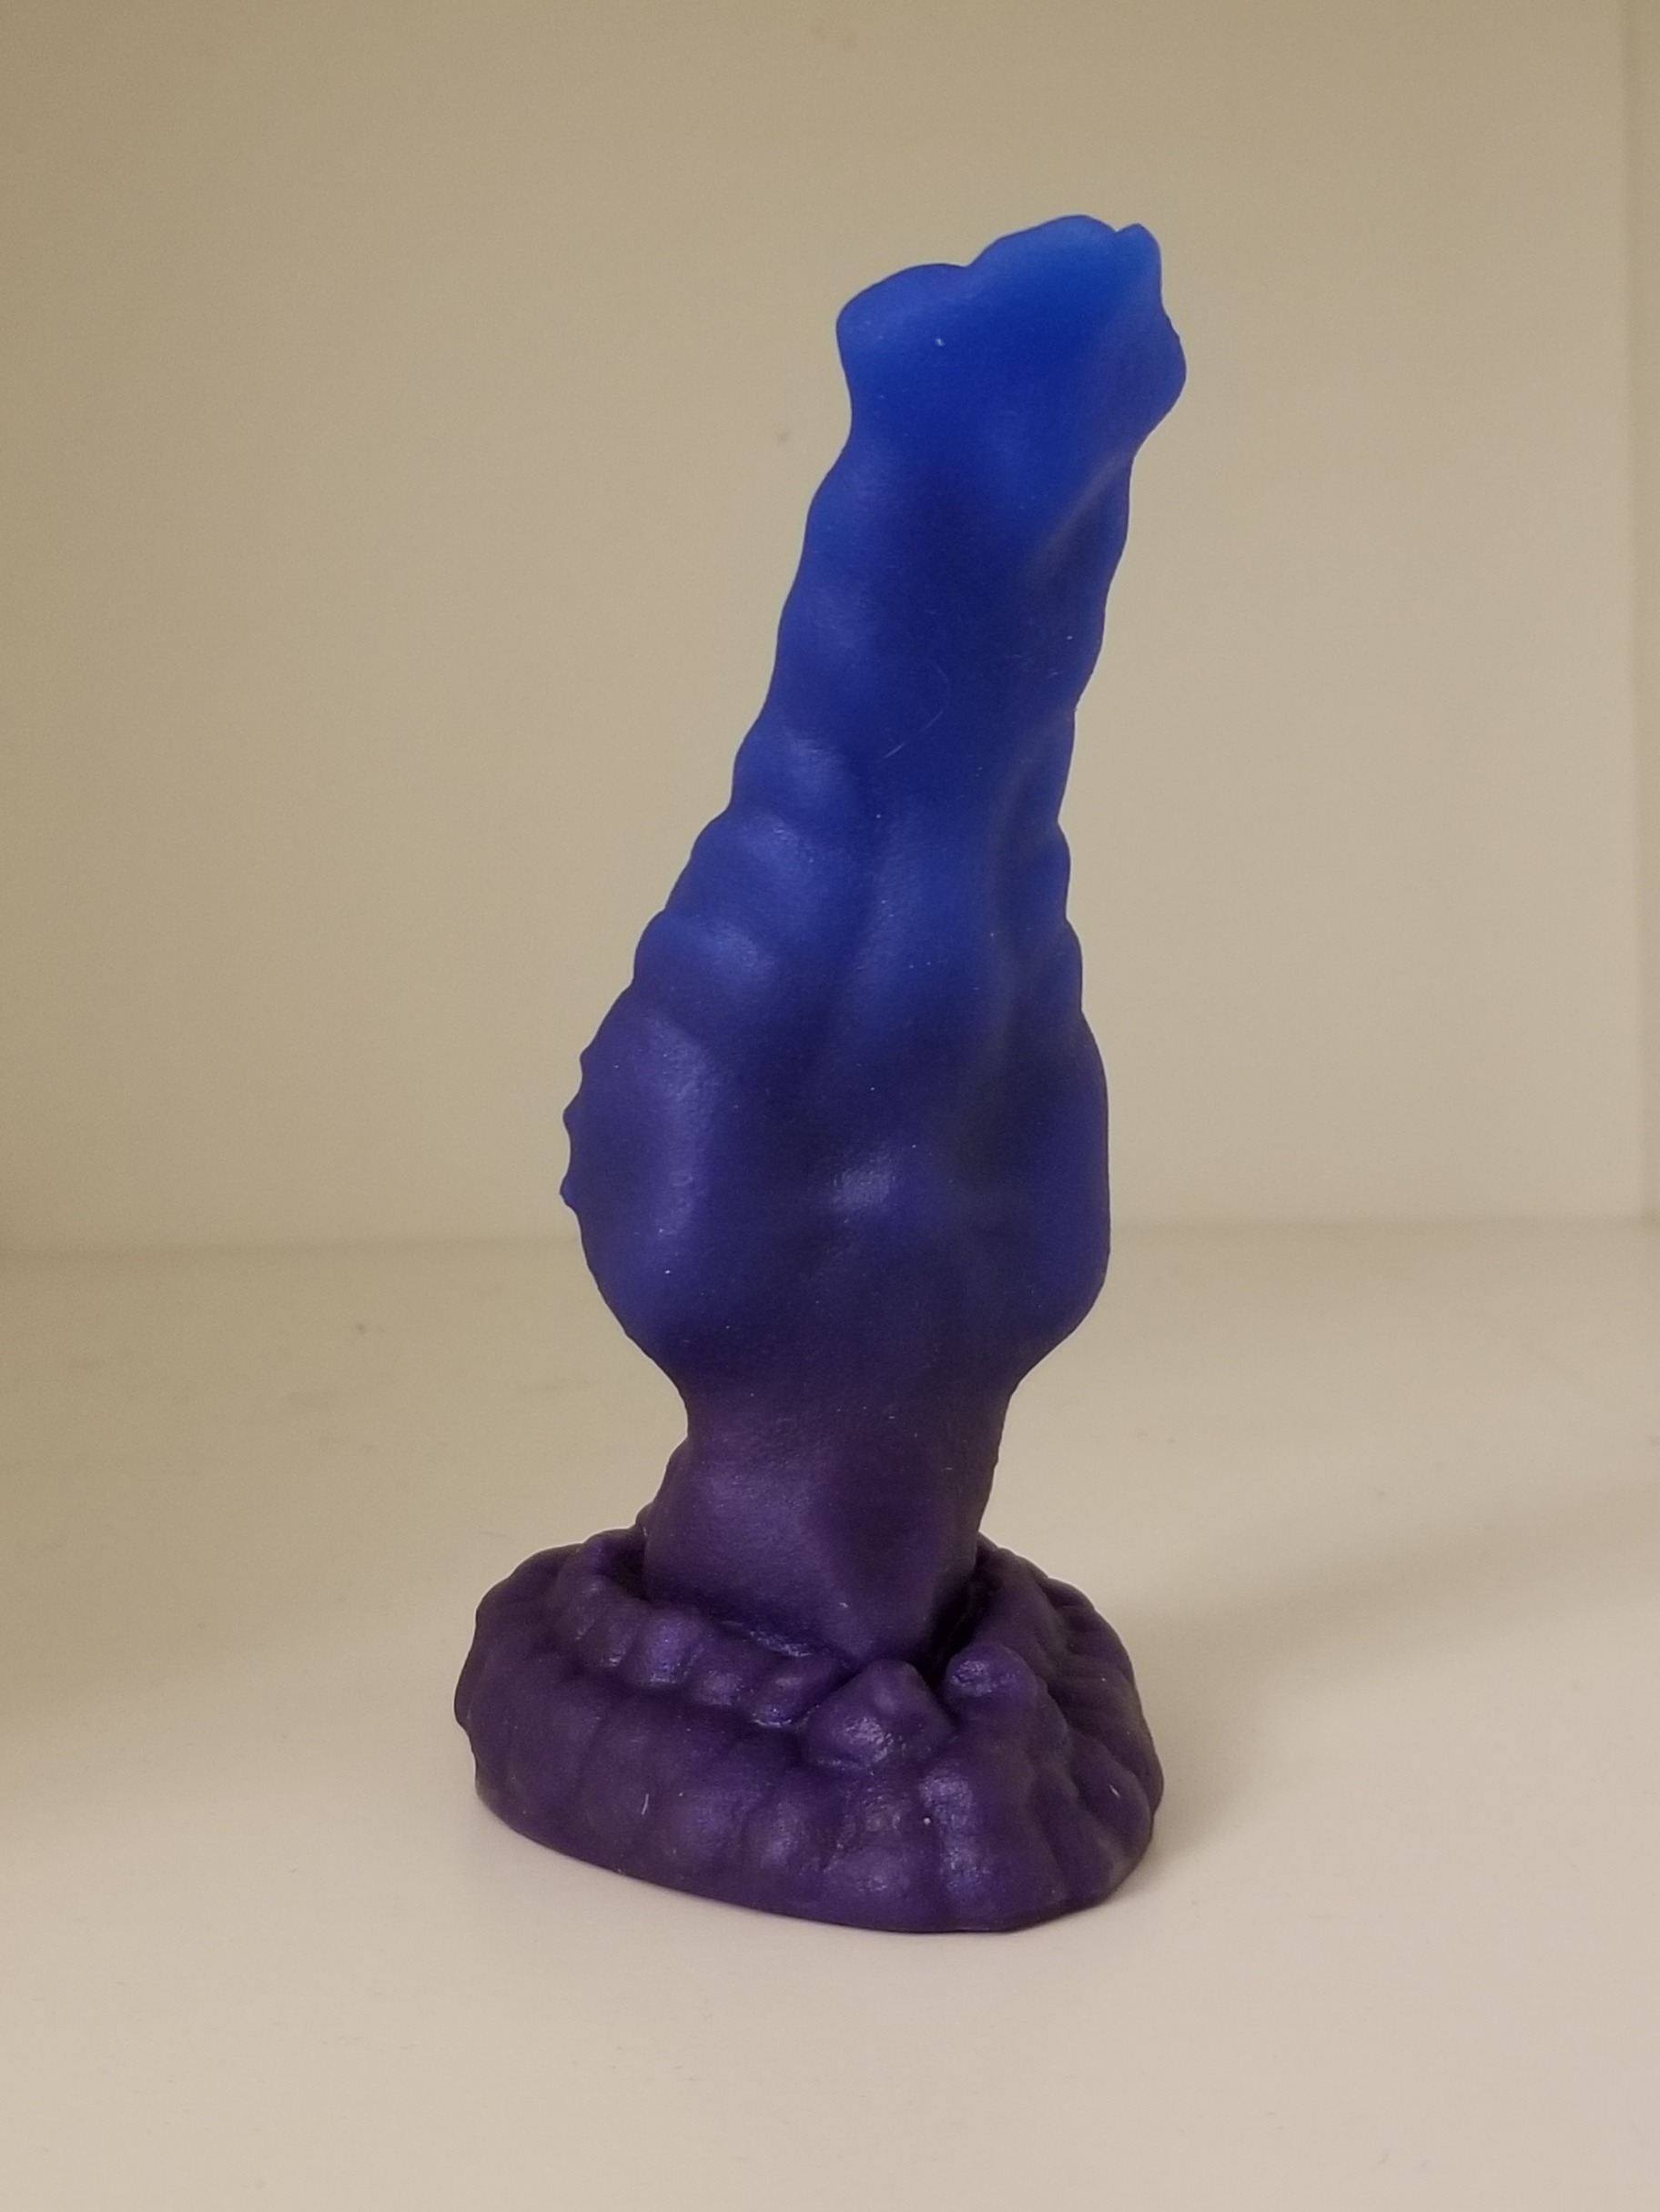 GUESS WHO GOT THEIR FIRST BAD DRAGON TOY?! adult photos